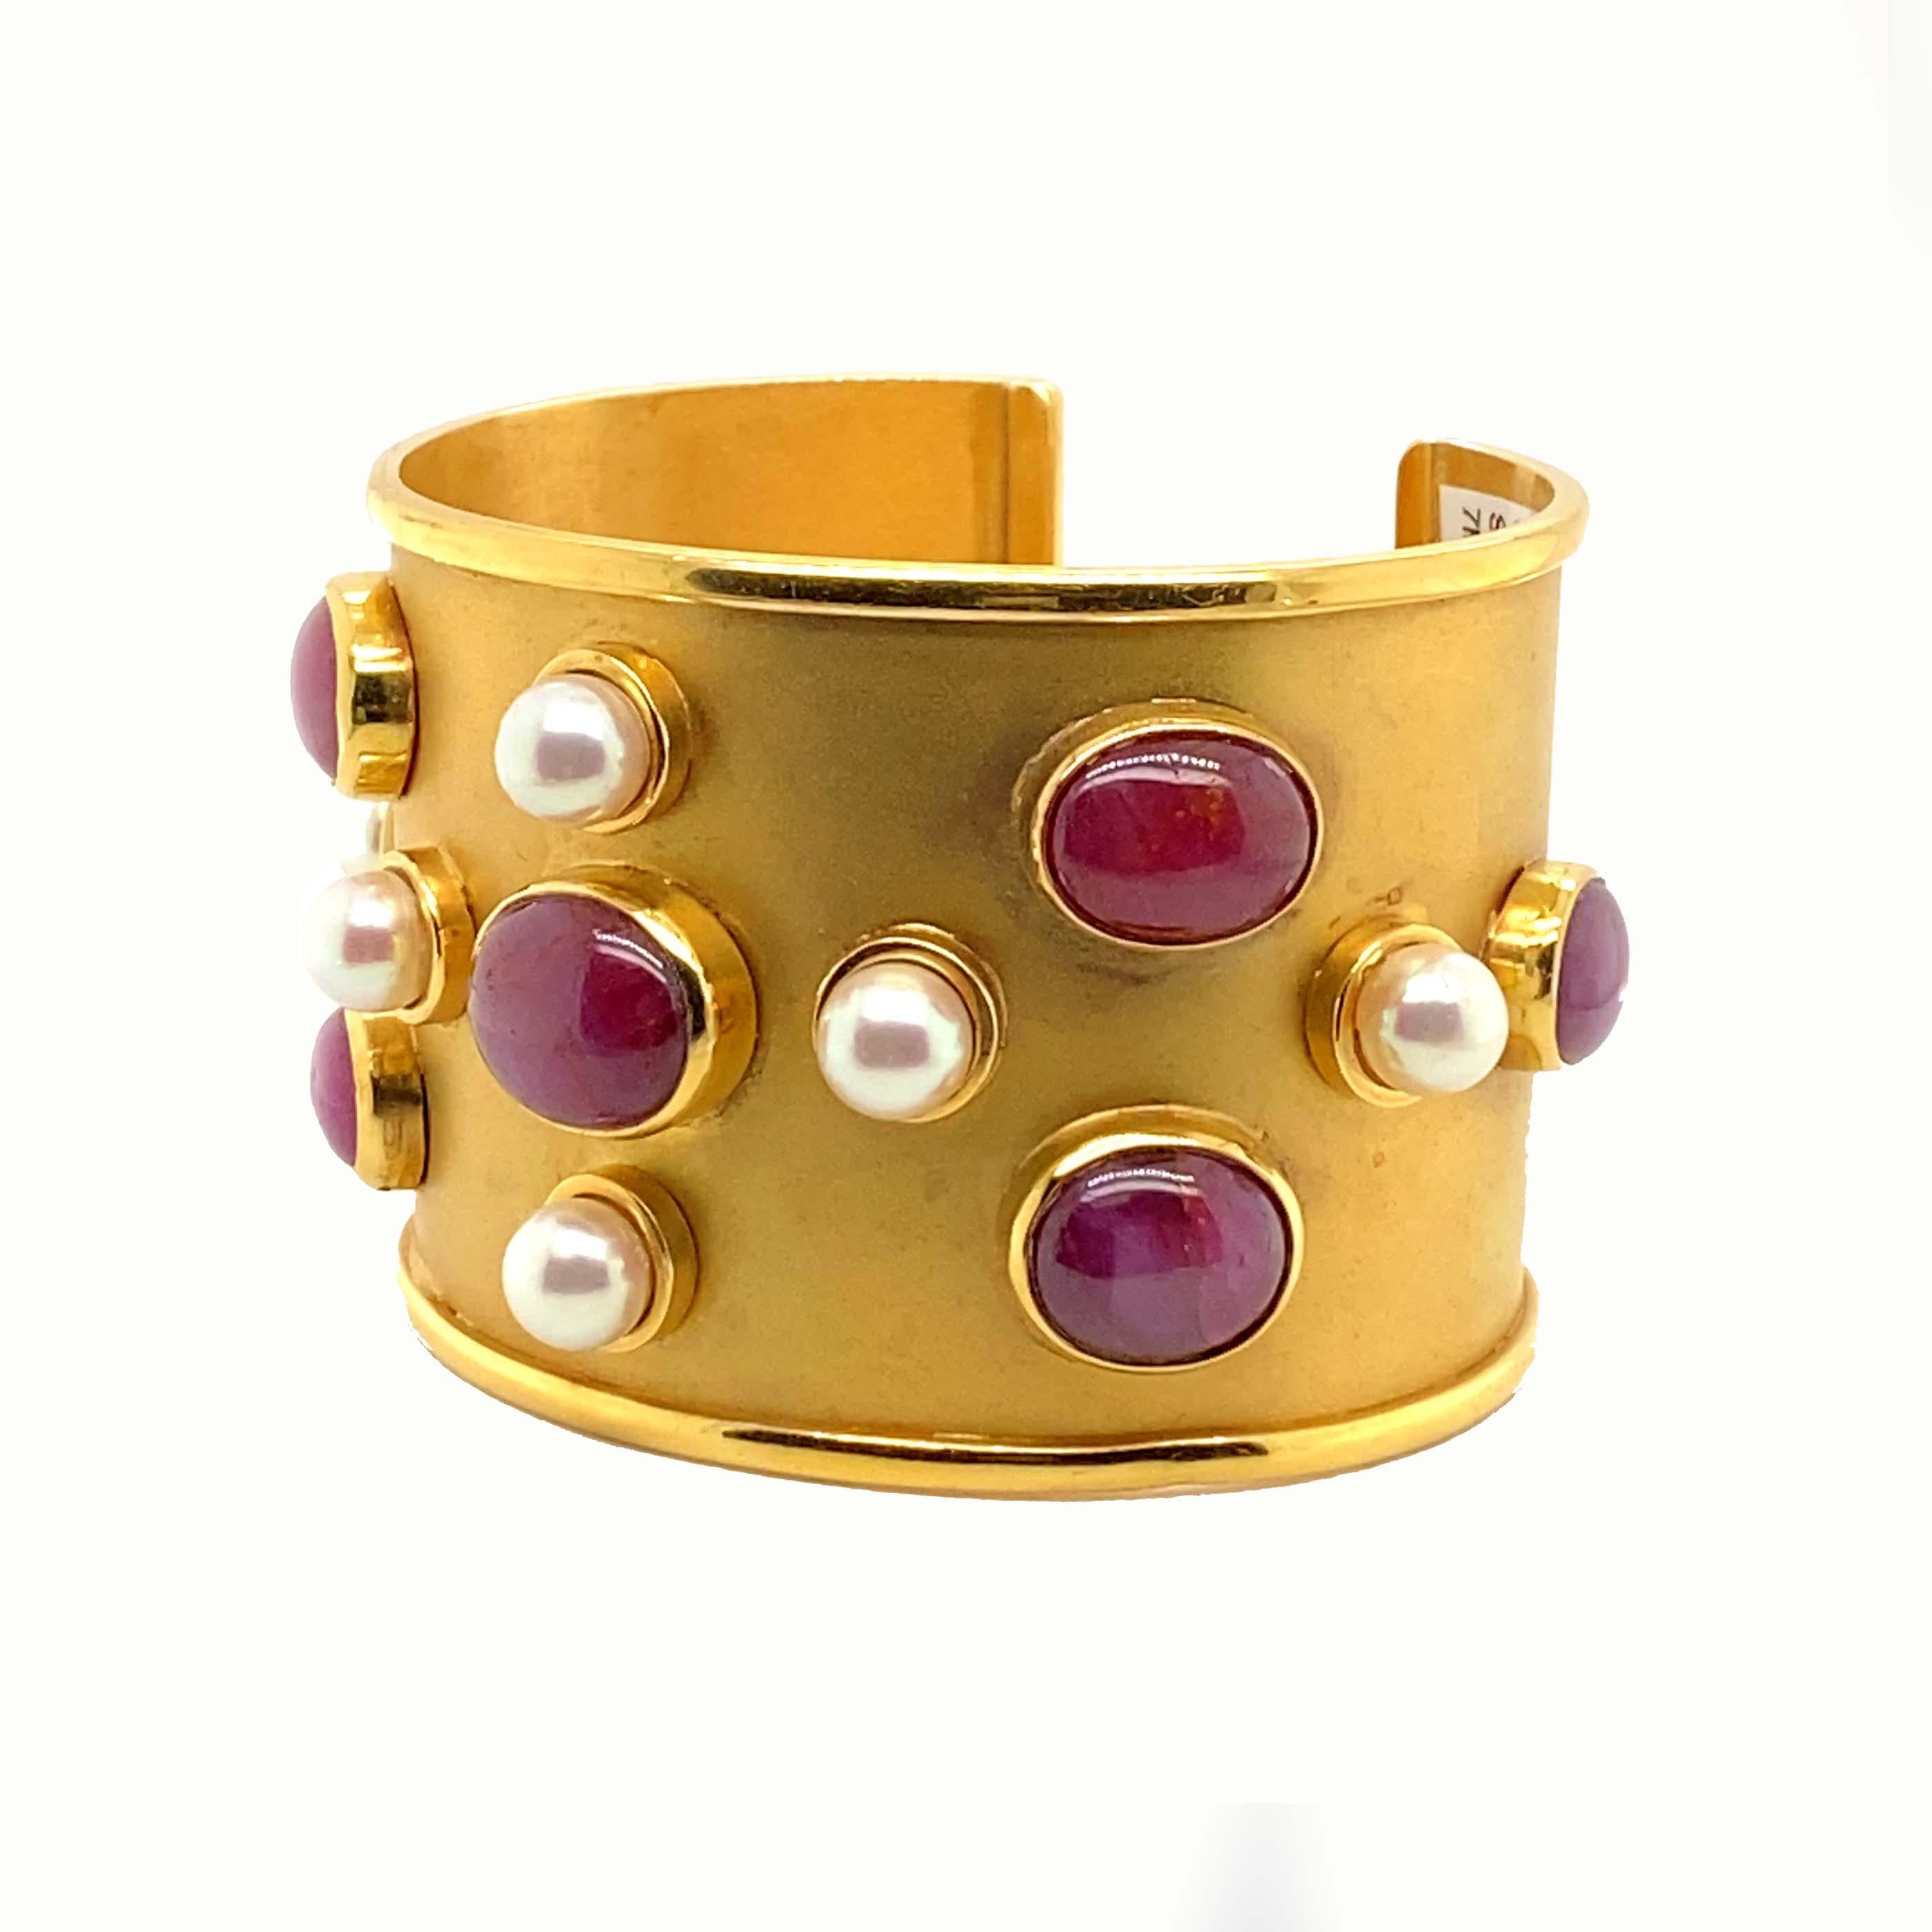 Star rubies are absolutely magical and one of the rarest types of rubies. When reflecting light you'll be able to see beautiful light, star patterns on the rubies. Each earring includes a star ruby, The yellow Gold Cuff bracelet is dotted with large